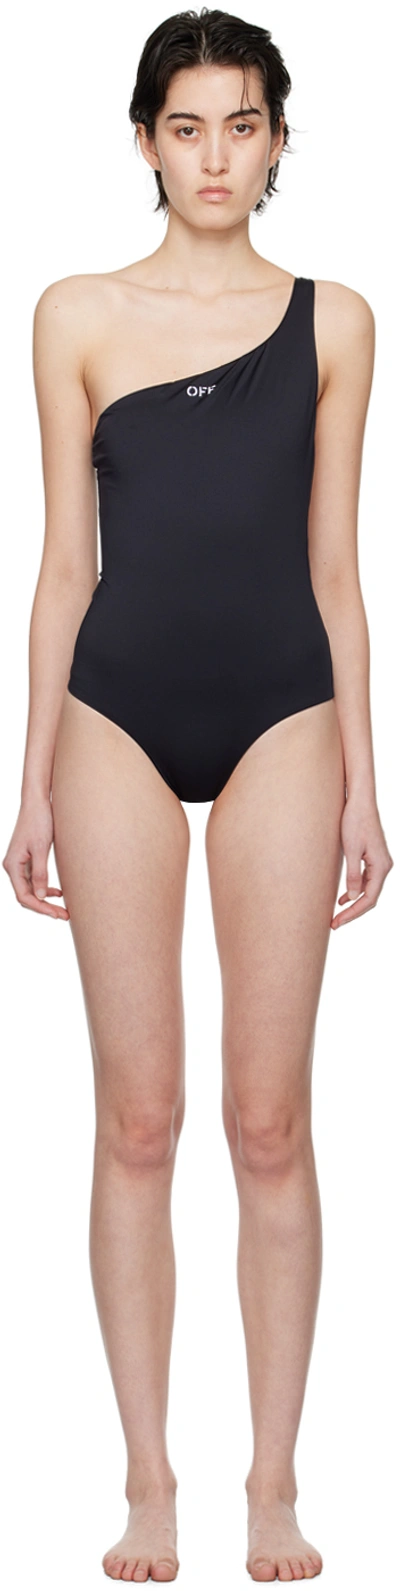 Off-white Black 'off' Stamp Swimsuit In Black White